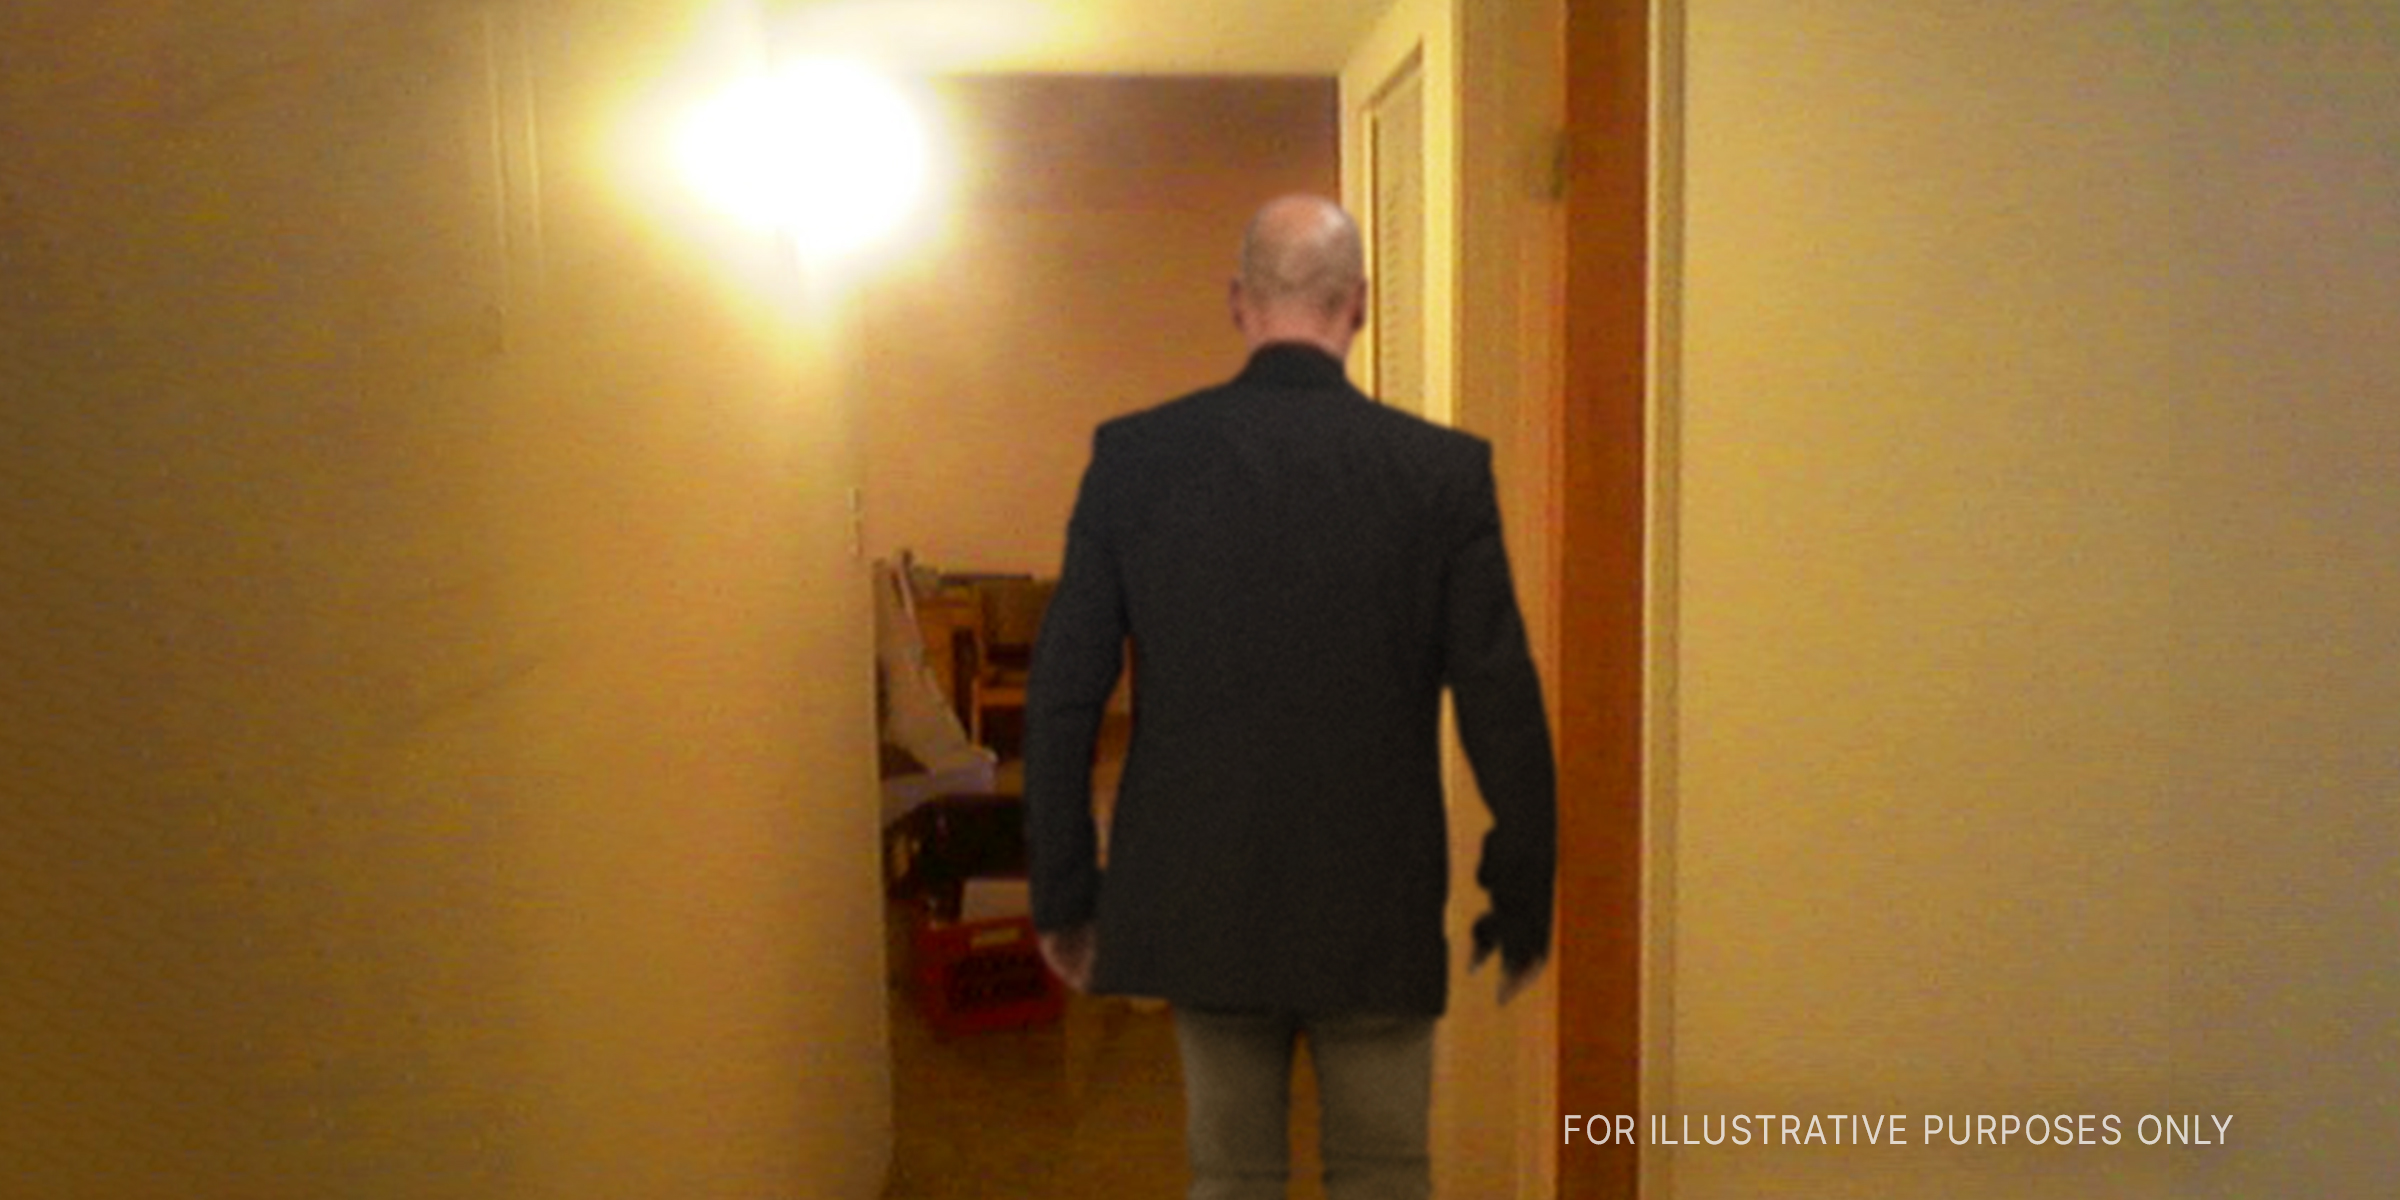 Man entering a room | Source: Shutterstock Flickr / kurmbox (CC BY-SA 2.0)